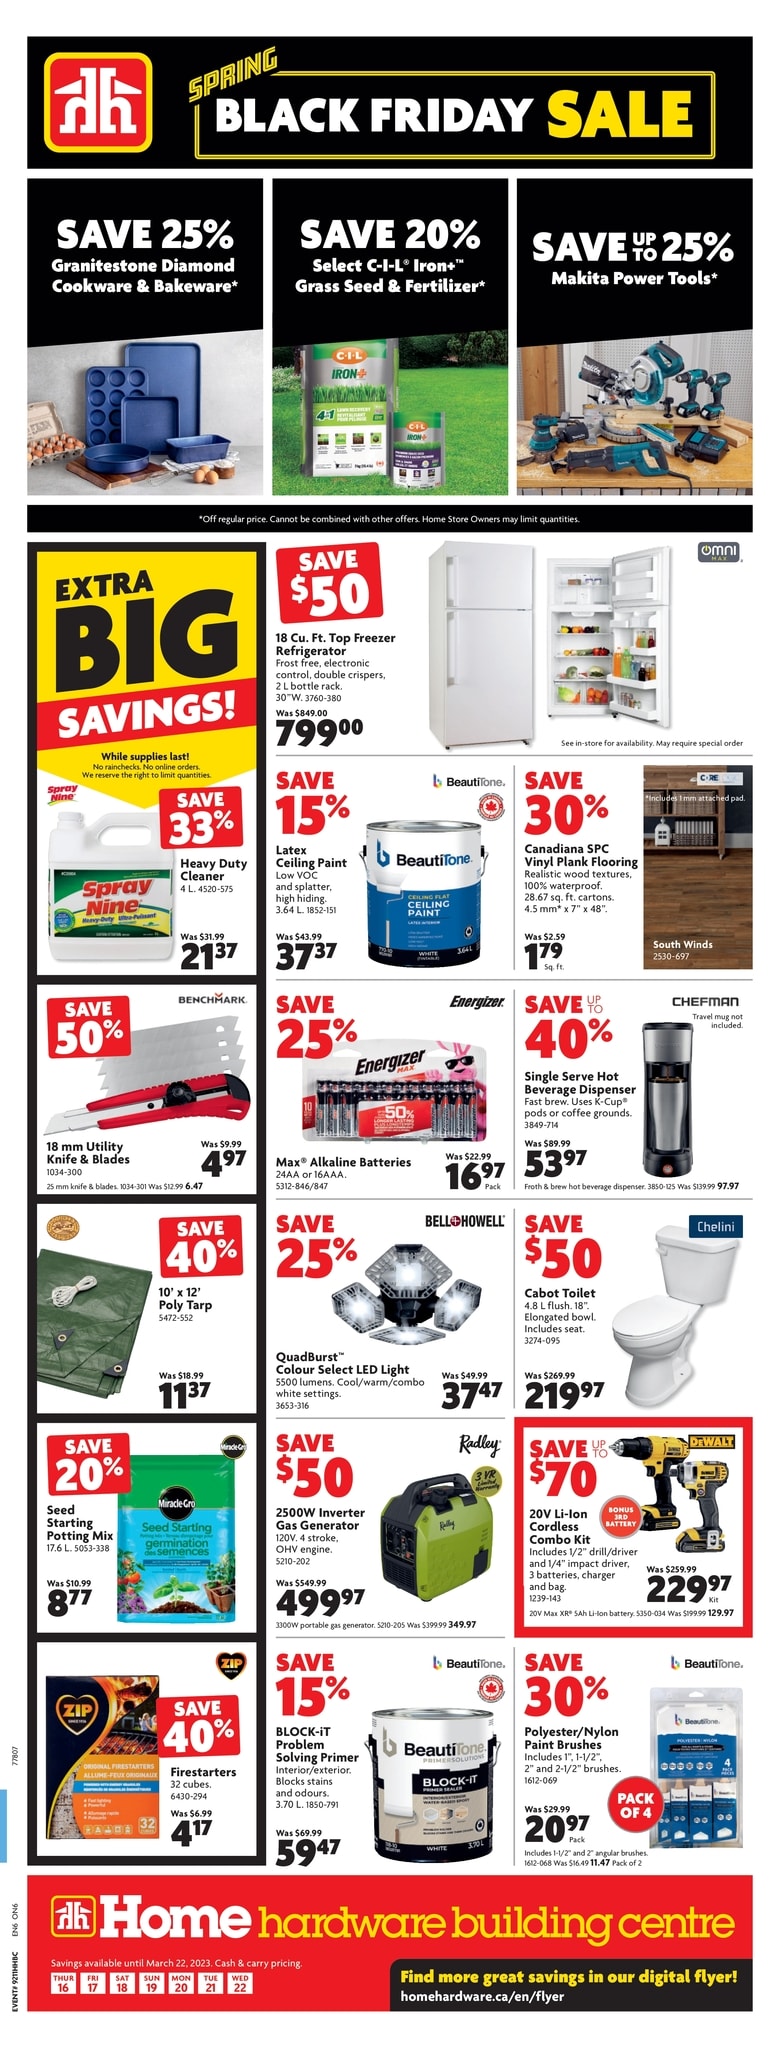 Home Hardware - Building Centre - Page 1